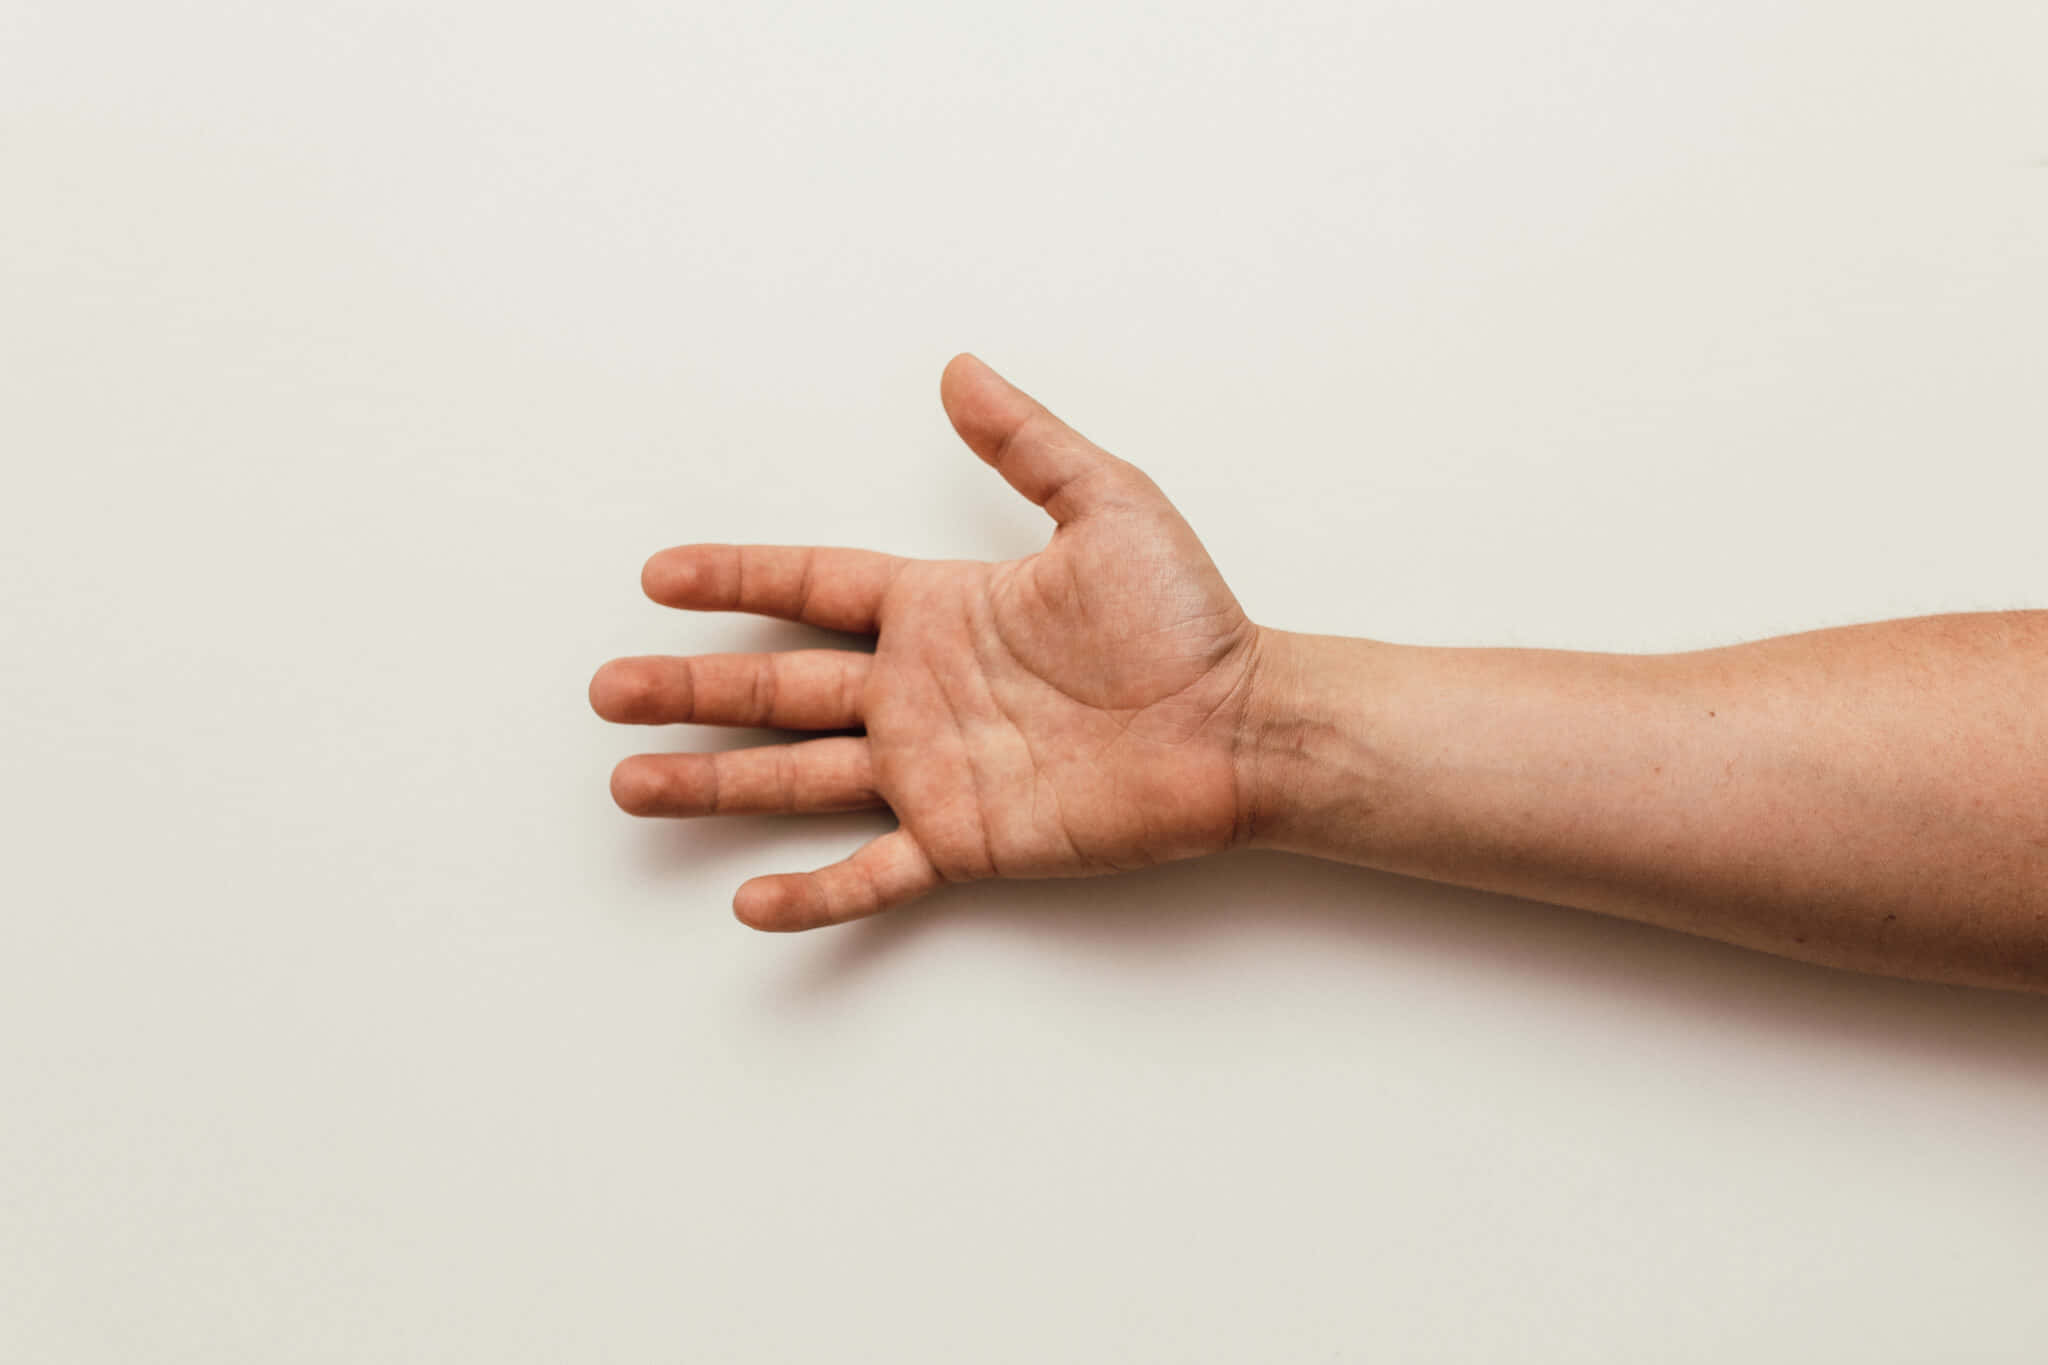 A Man's Hand Reaching Out To The Side